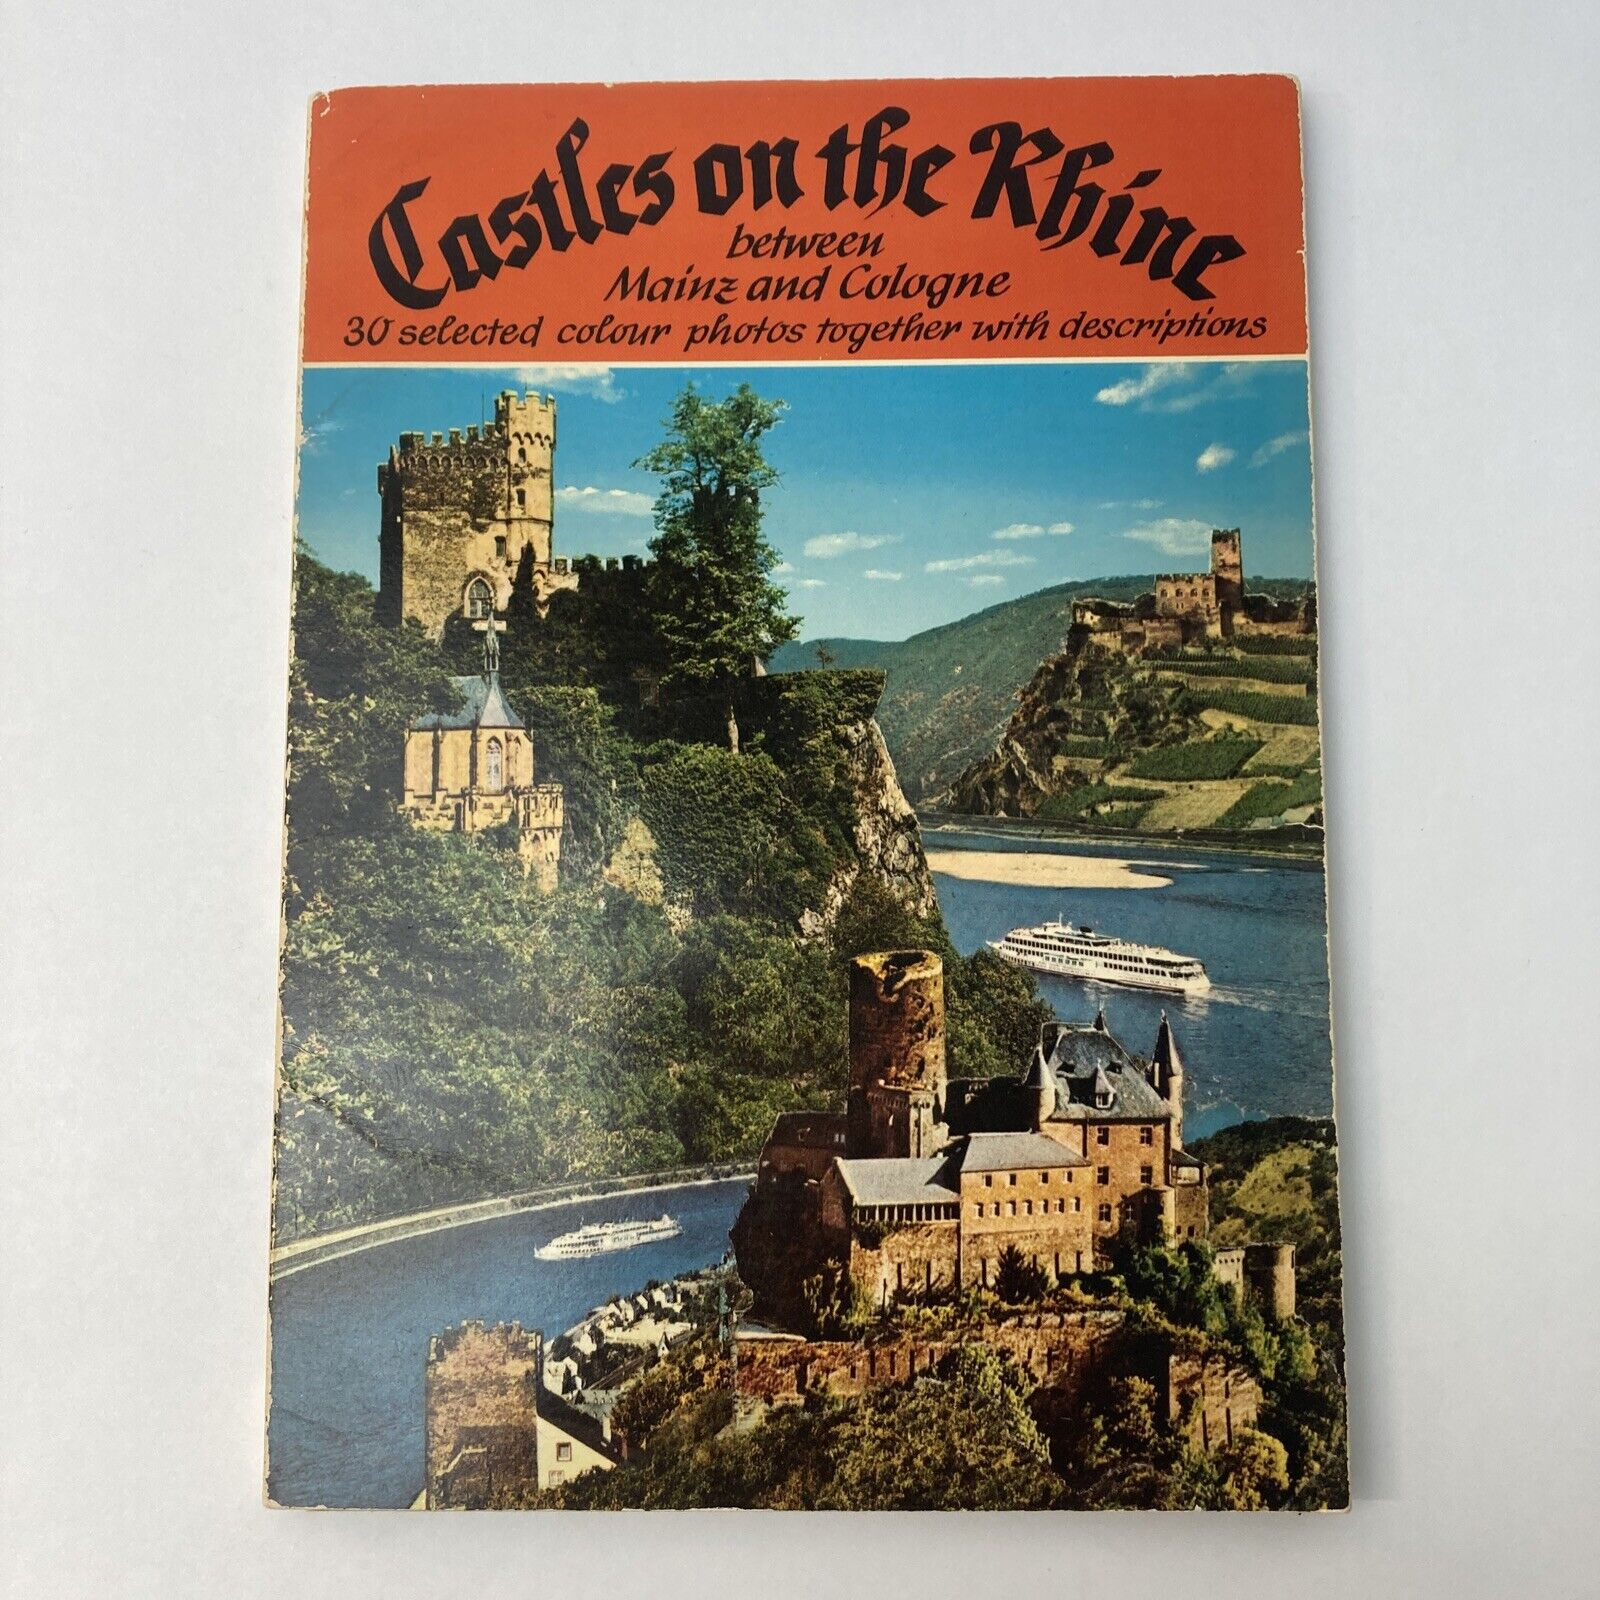 Castles on the Rhine Between Mainz and Cologne 1976 Beautiful Photos